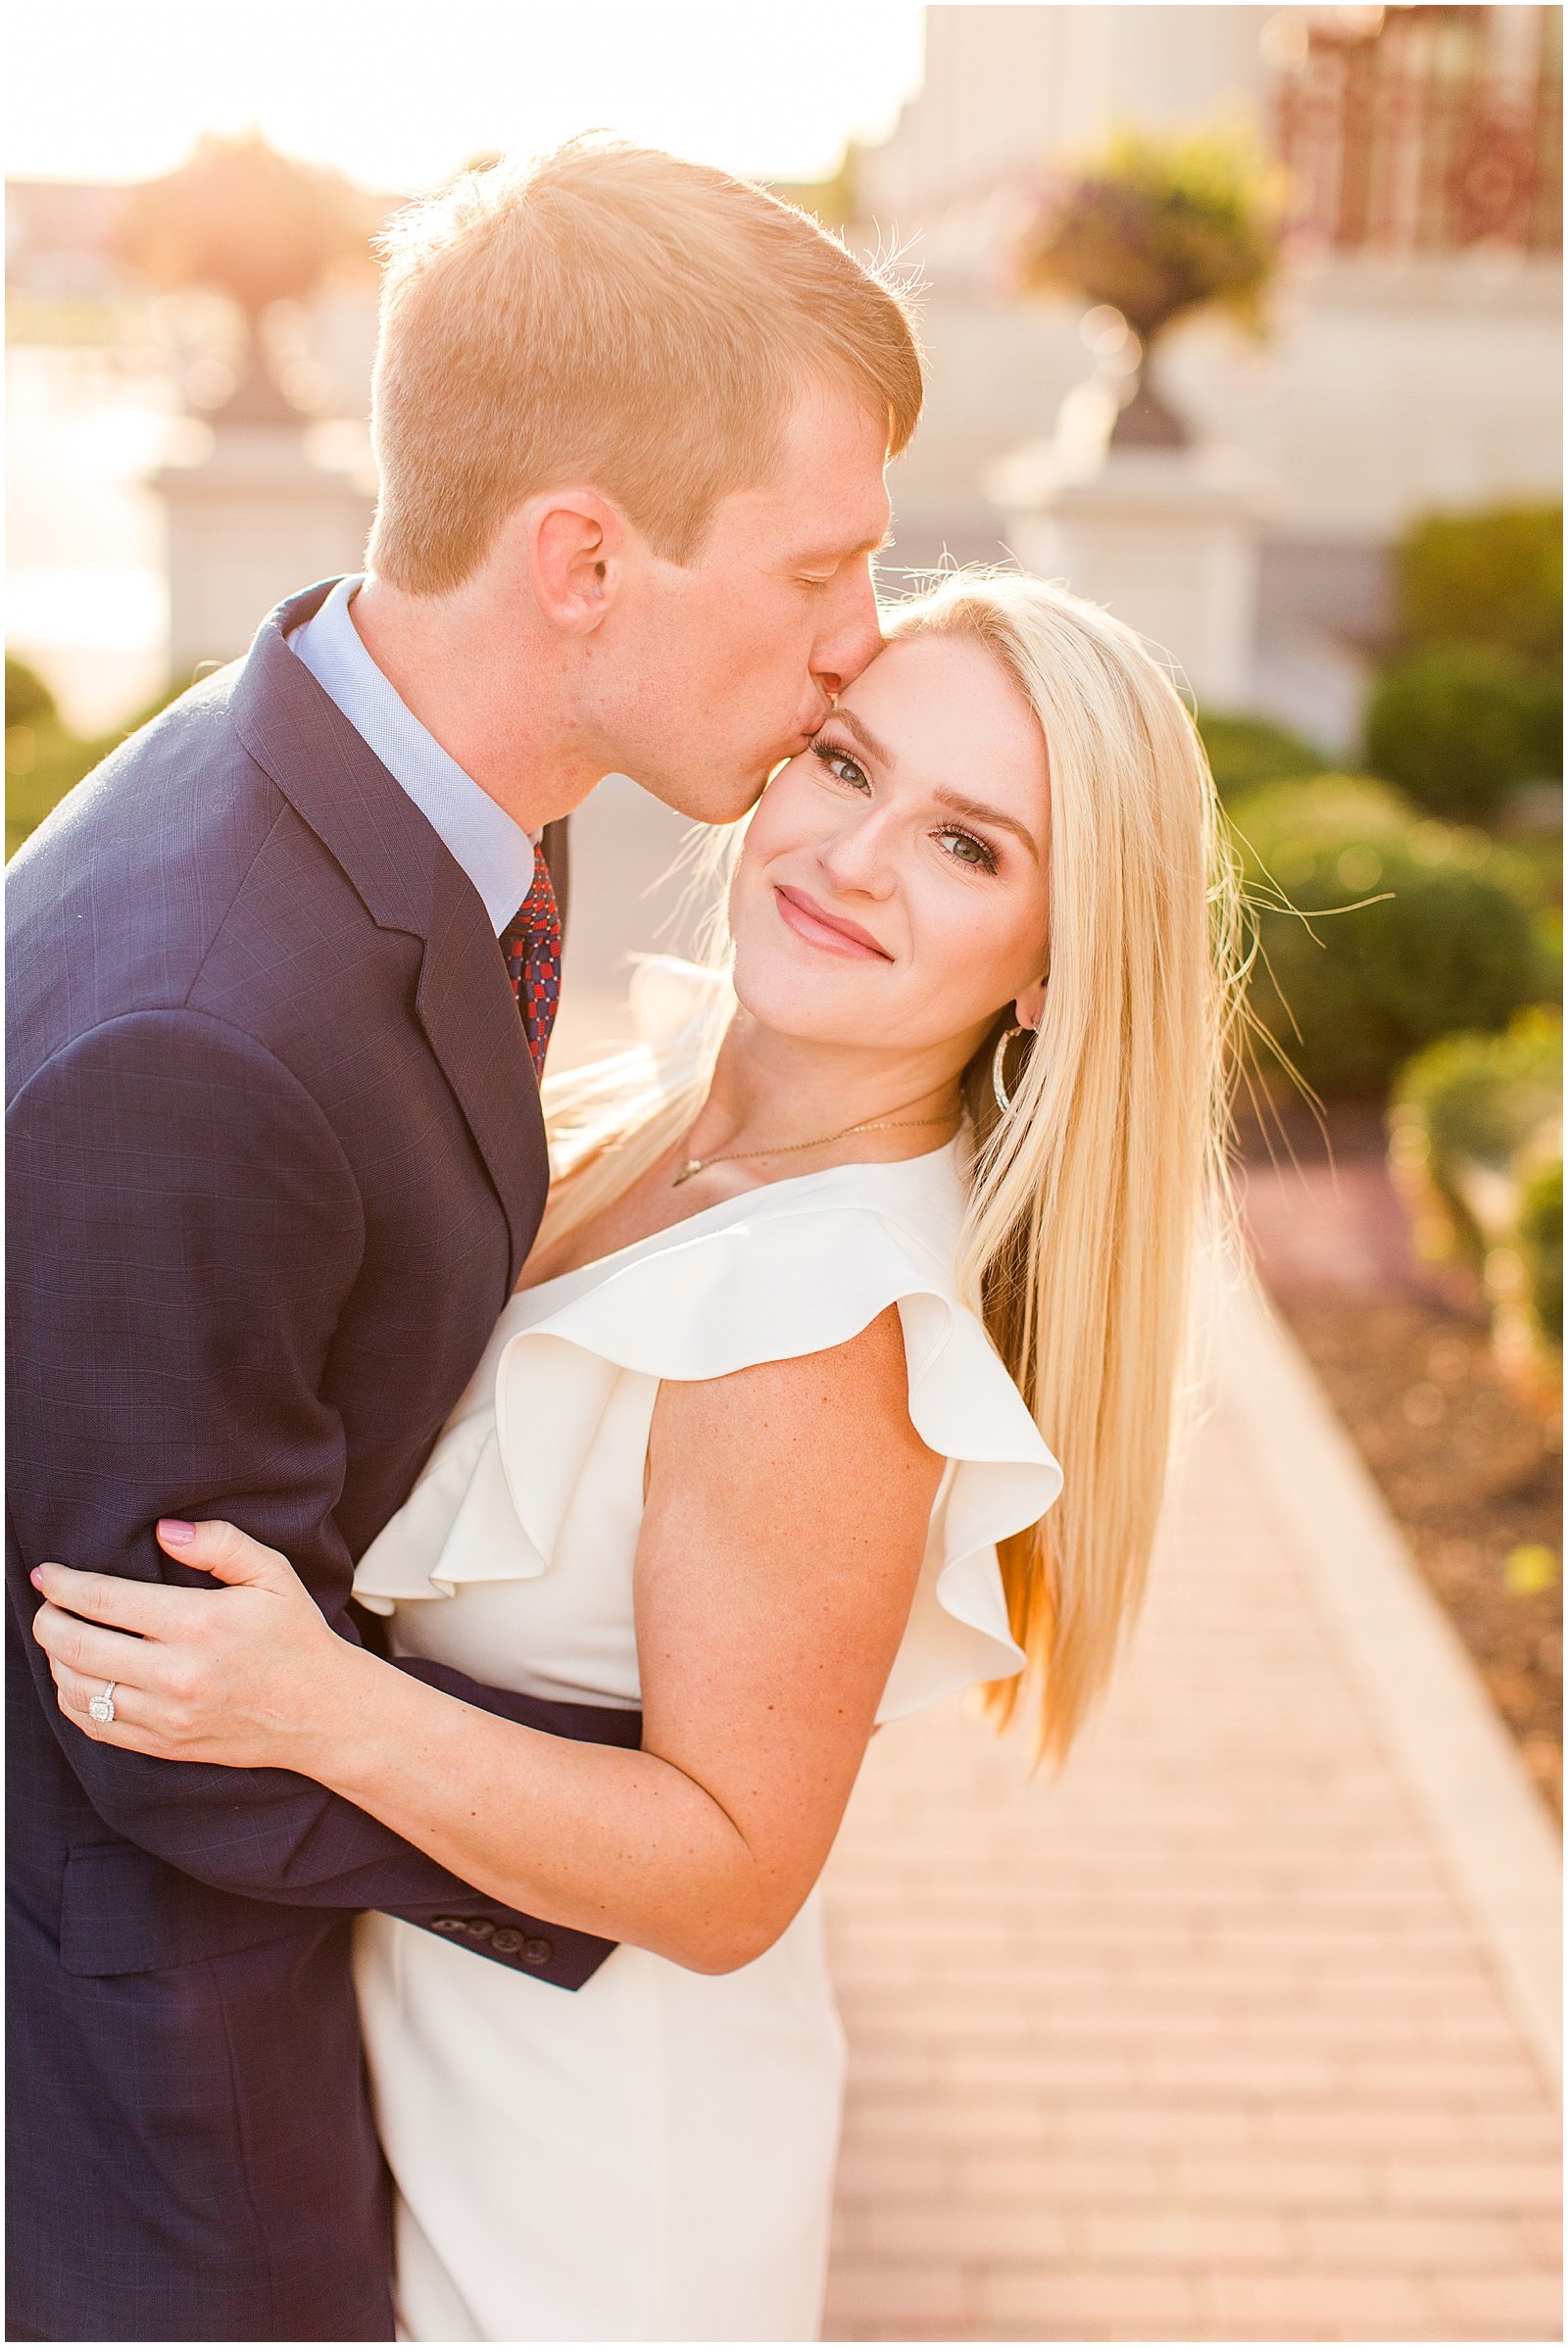 A Cute and Cuddly Engagement Session in Carmel, IN | Abbi and Josh0018.jpg